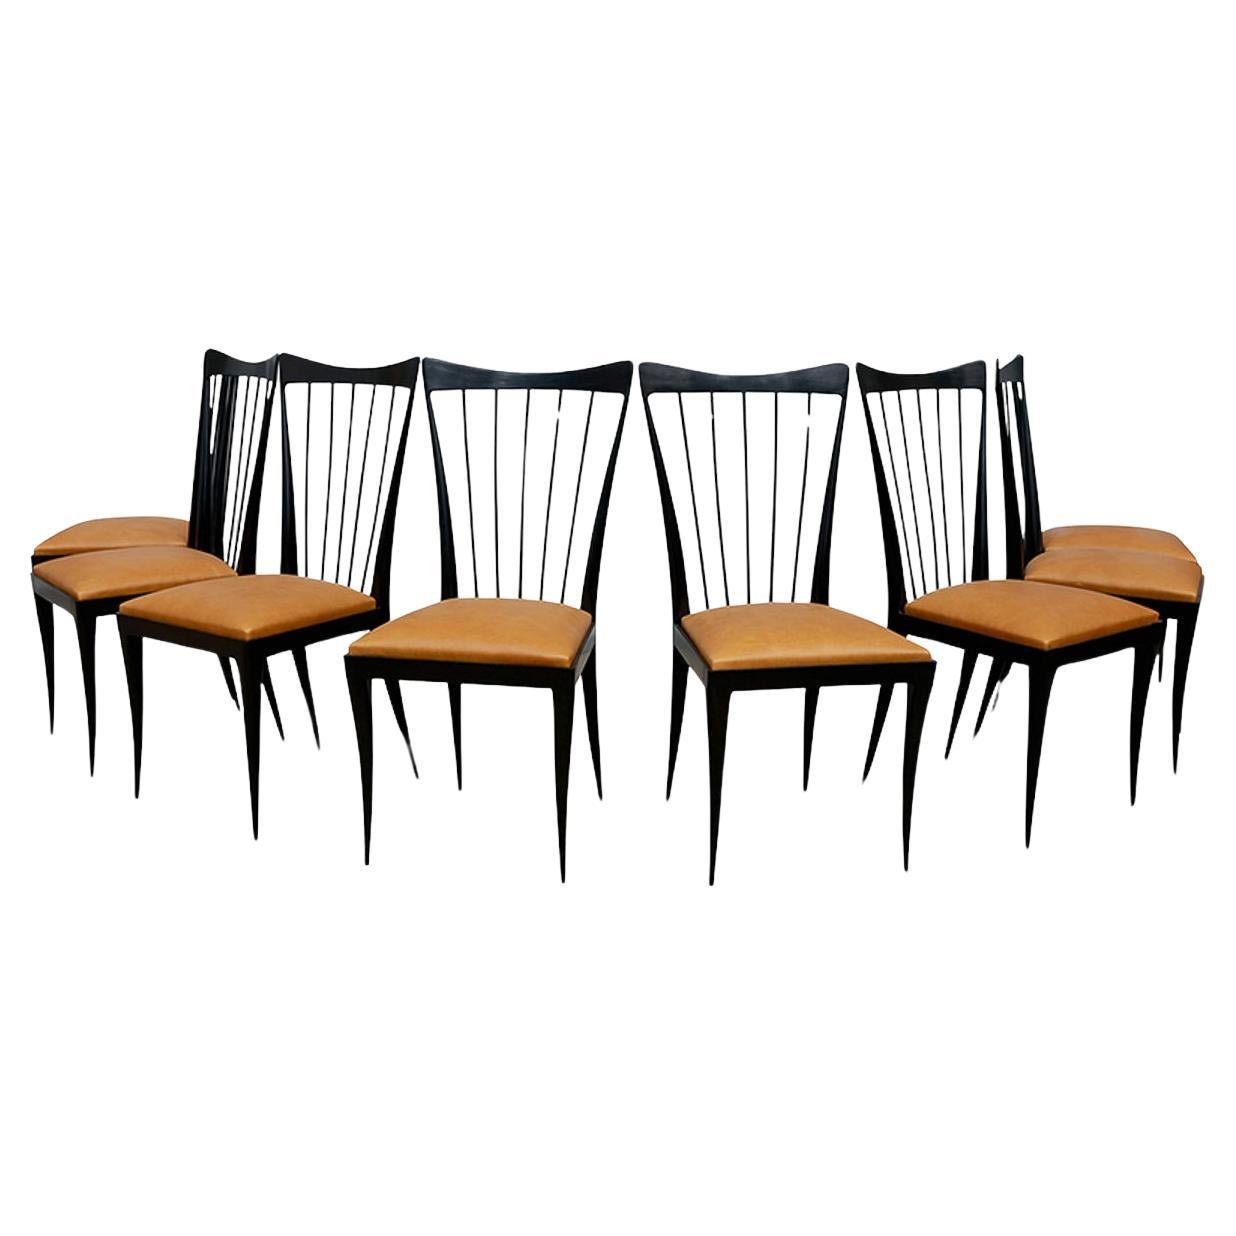 Eight Dining Chair Set in Hardwood & beige leather, Giuseppe Scapinelli, Brazil For Sale